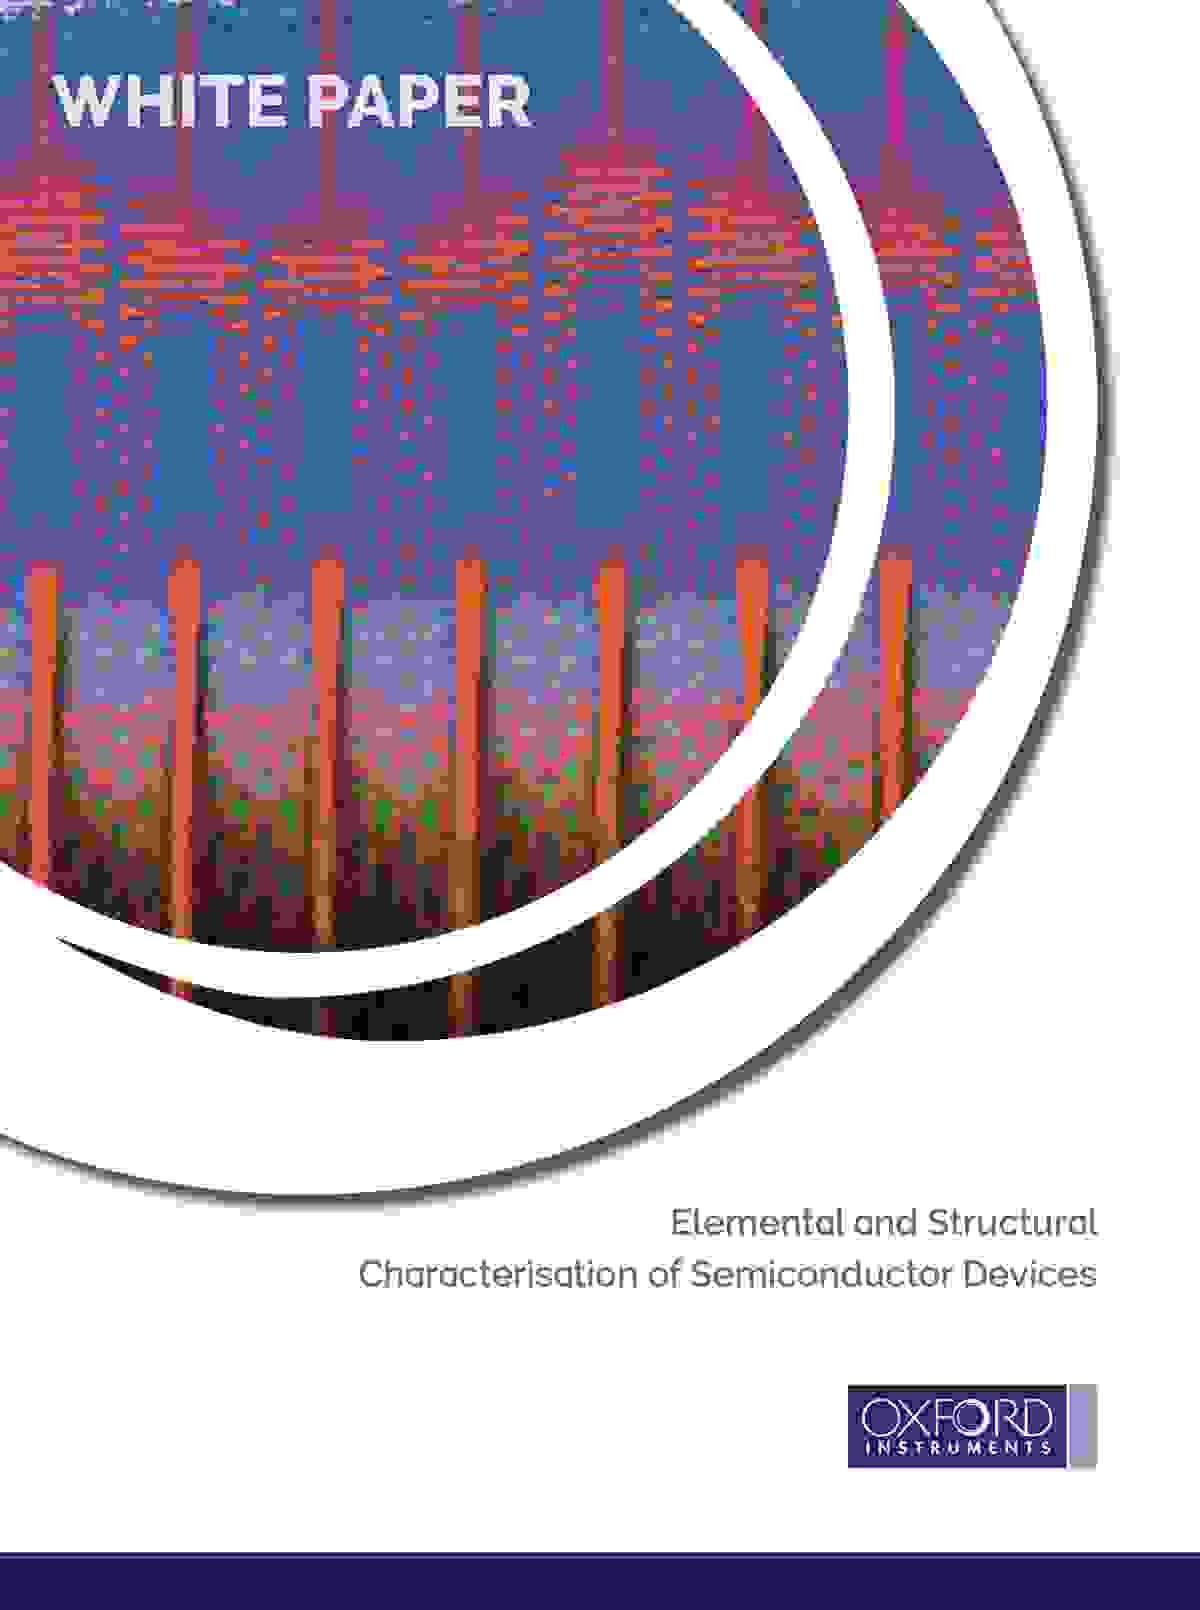 Elemental and Structural Characterisation of Semiconductor Devices Whitepaper